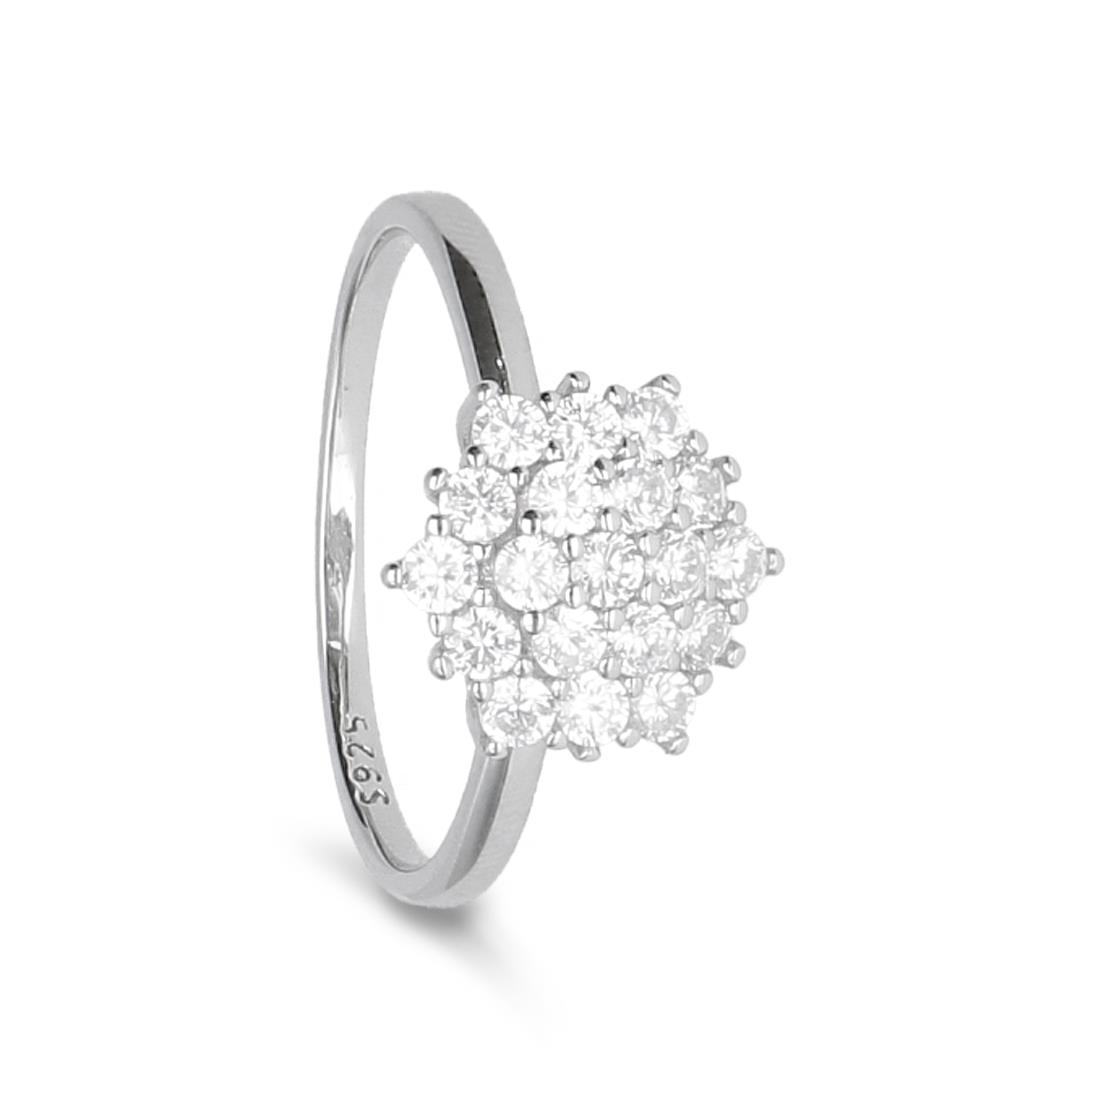 Silver solitaire ring with zircons - LUXURY MILANO